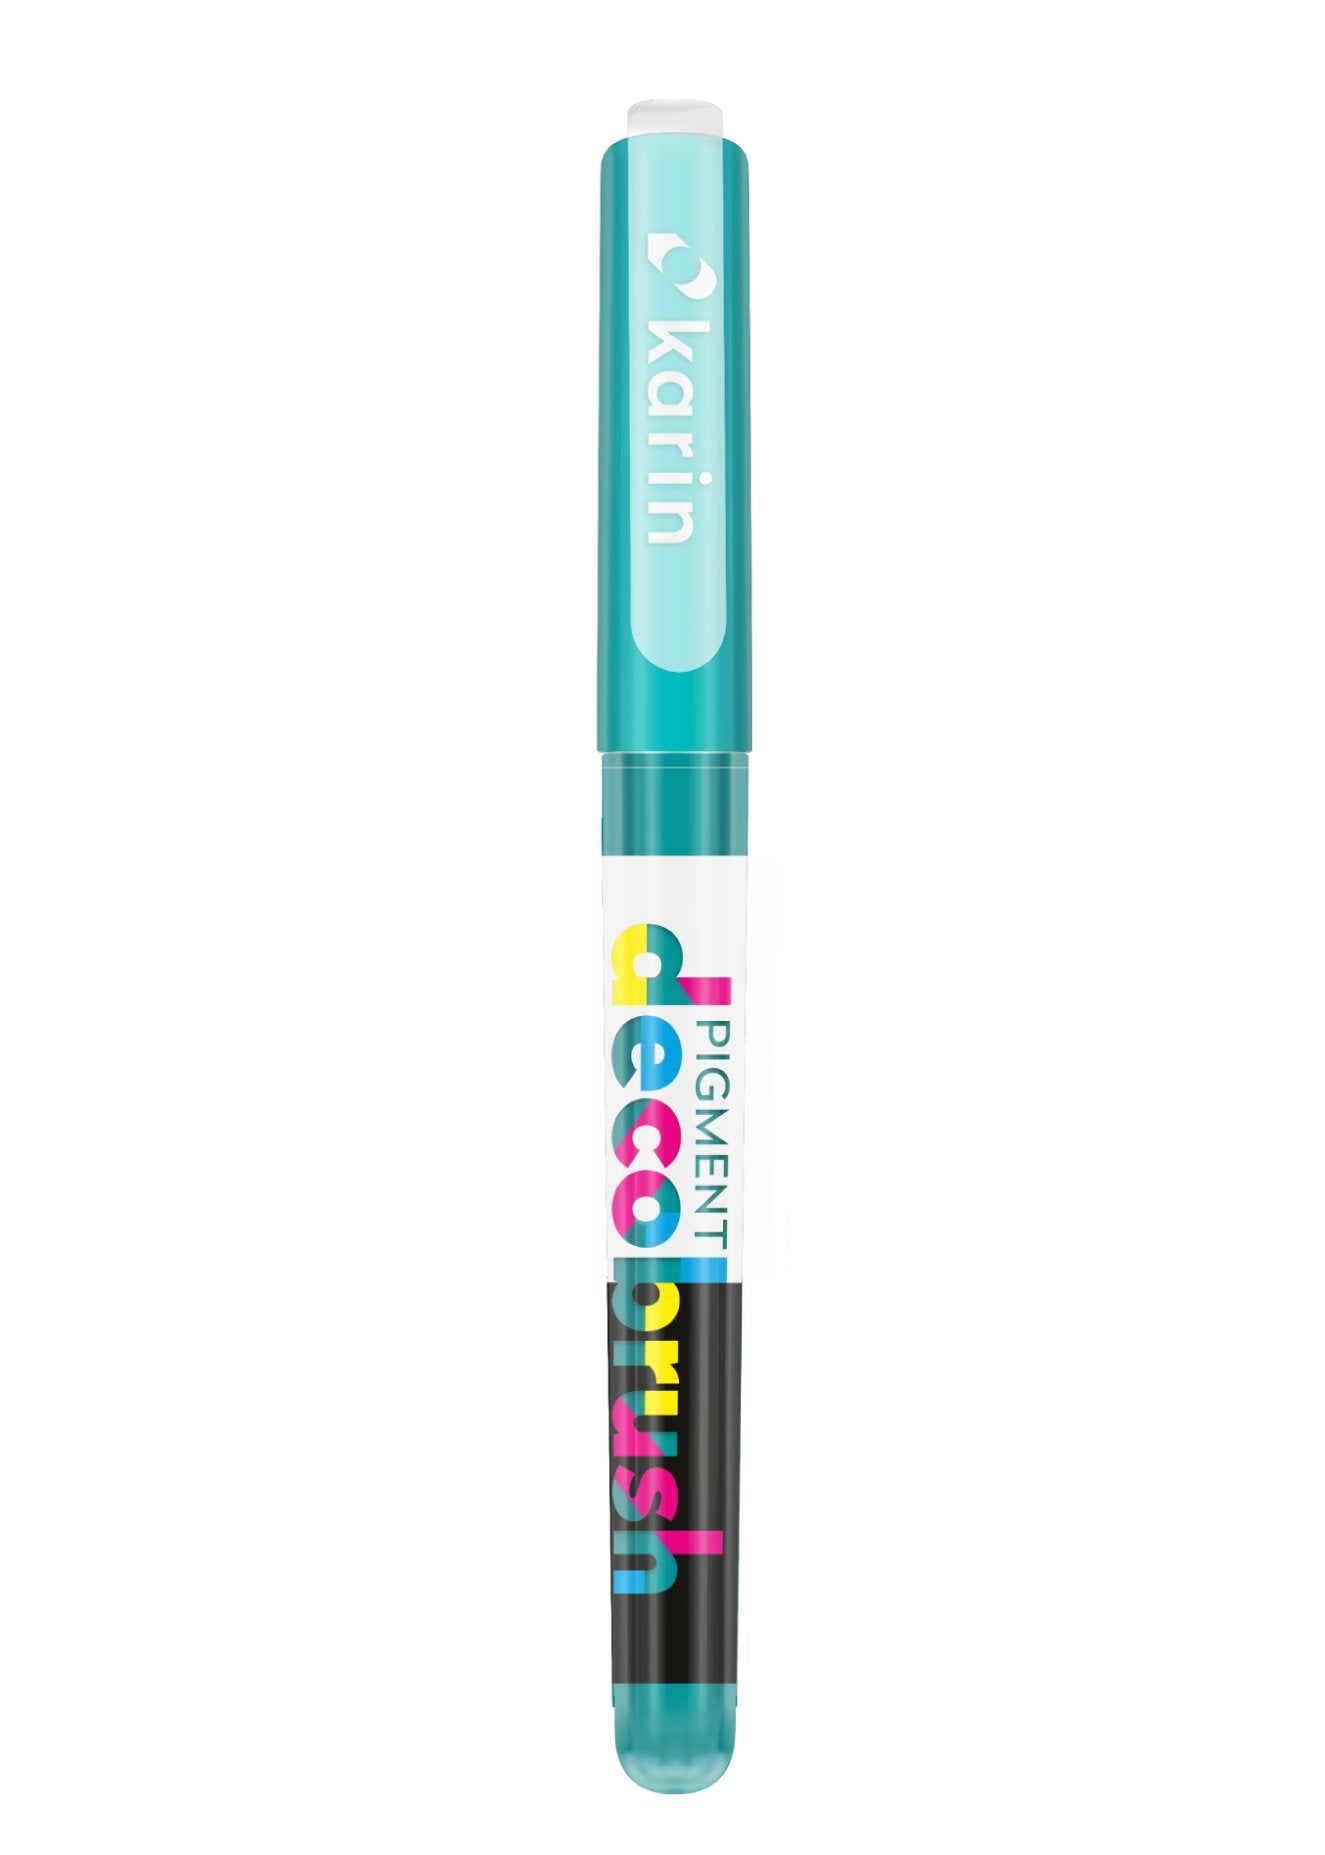 Feutres Karin Markers PIGMENT Décobrush - Karin Markers - TURQUOISE 3145U - millenotes